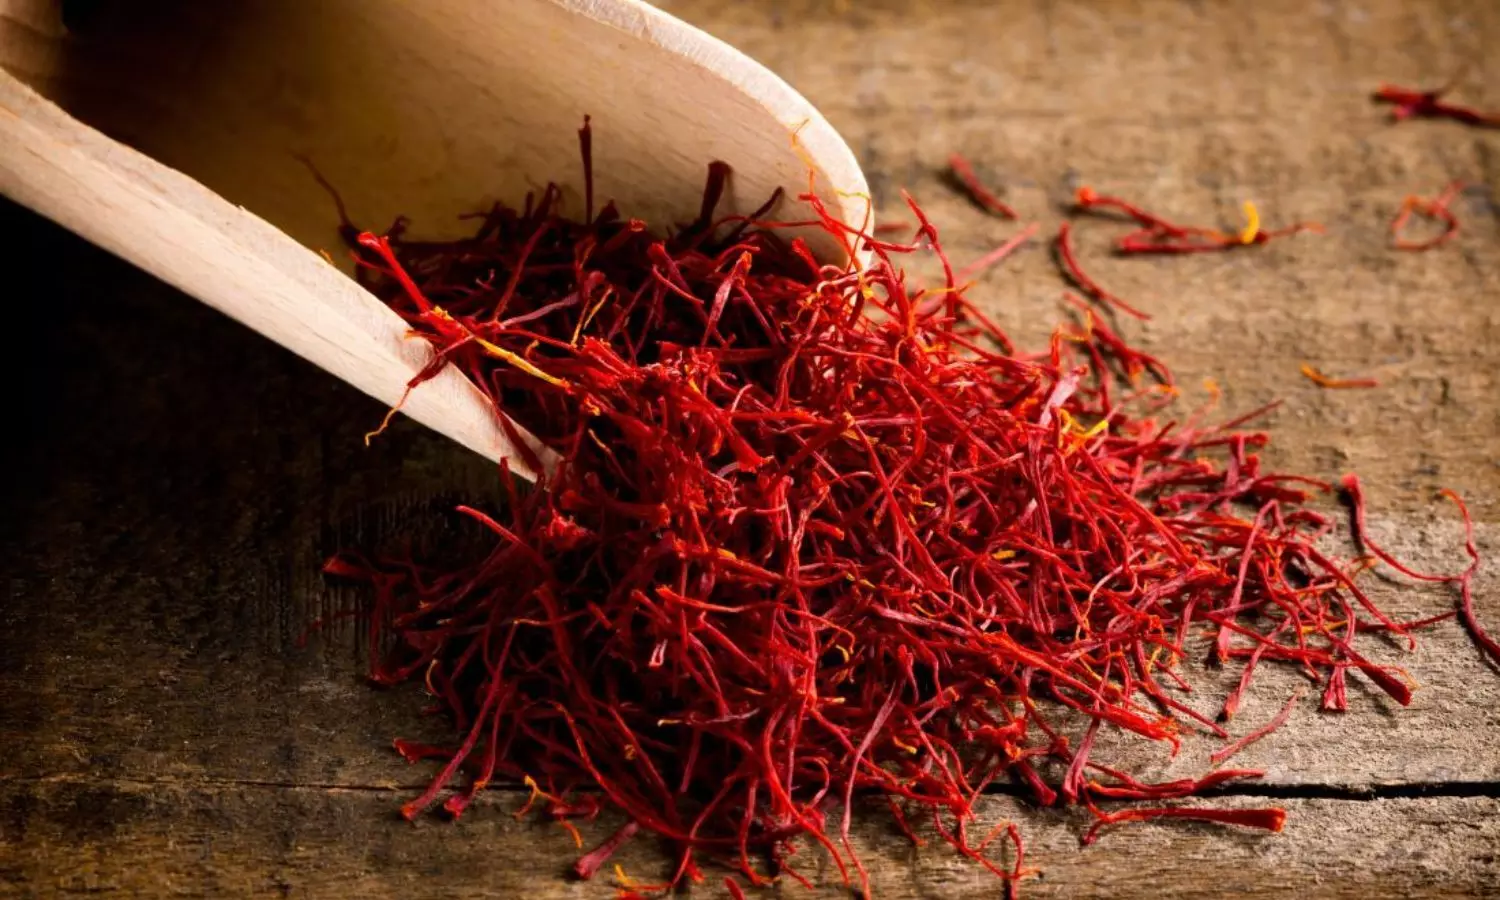 Saffron supplementation with aerobic exercise may lower blood sugar and inflammation in obese diabetics